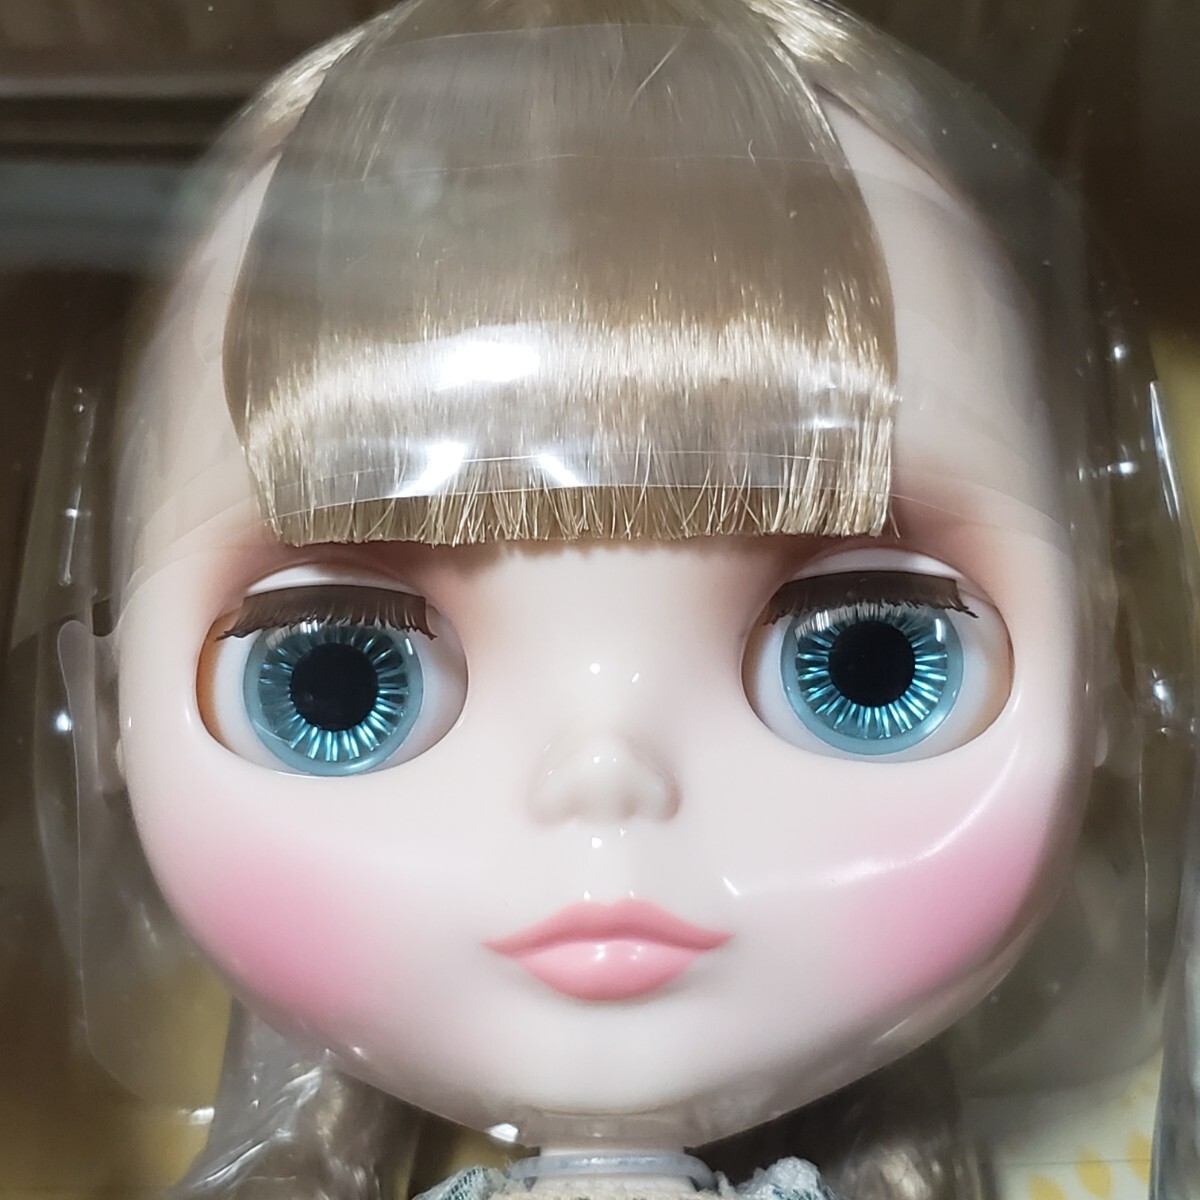 Blythe ネオブライス Cleary Claire クリアリィクレア TOP SHOP限定 未開封の画像3